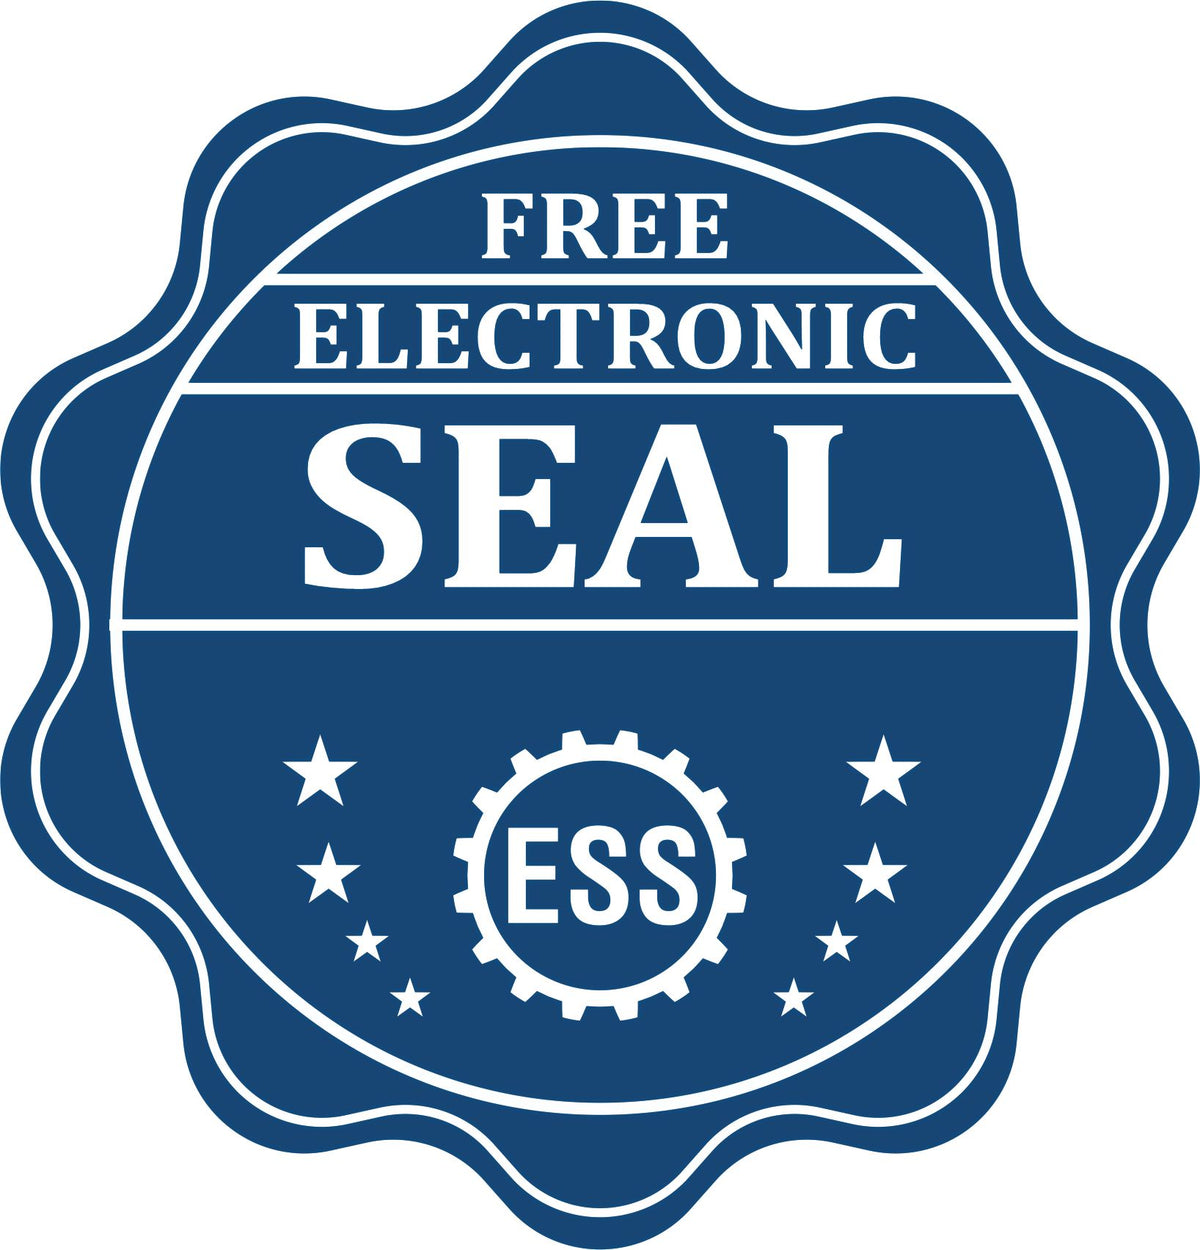 A badge showing a free electronic seal for the Slim Pre-Inked Montana Professional Engineer Seal Stamp with stars and the ESS gear on the emblem.